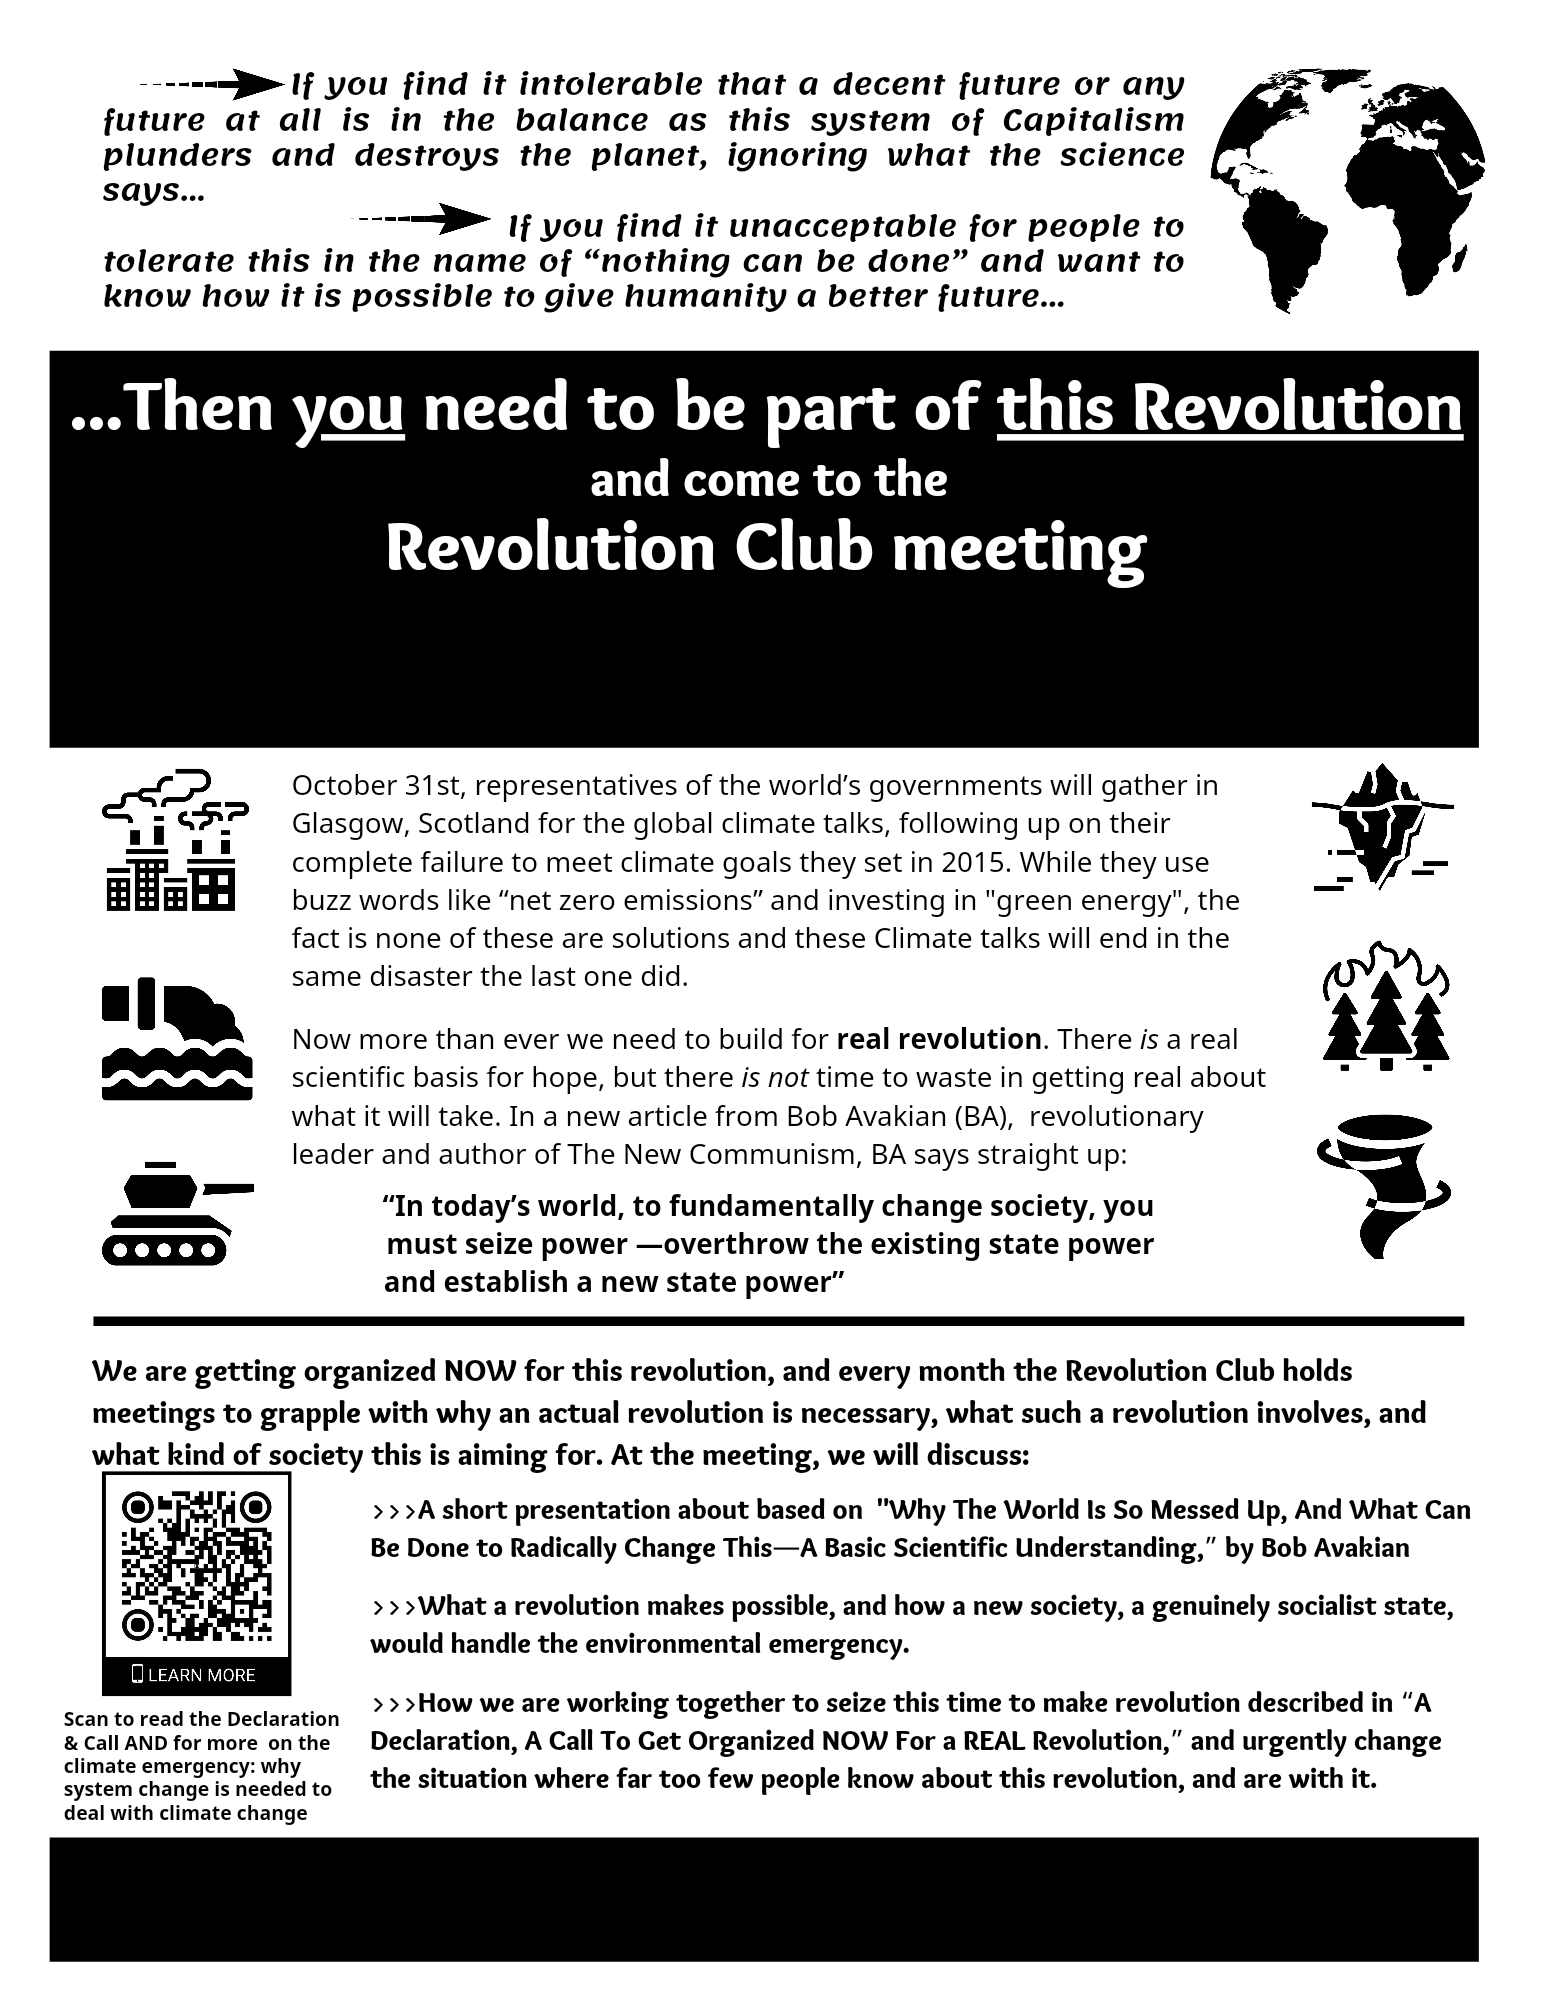 You Need to Be Part of This Revolution - General version